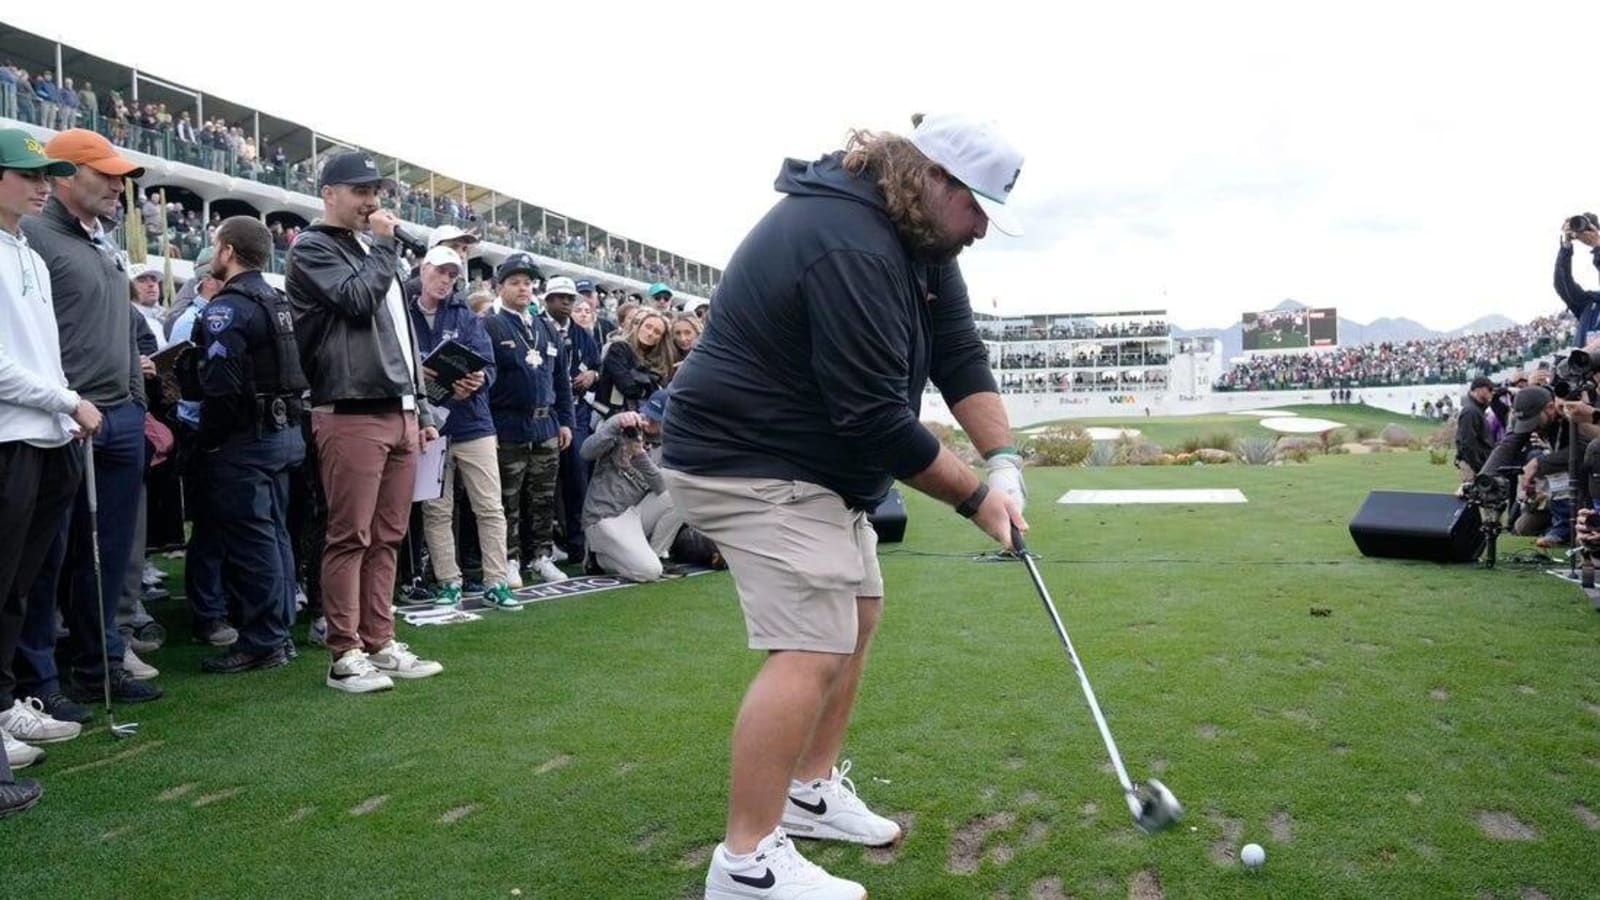 Golf influencers invited to qualifier for new PGA event